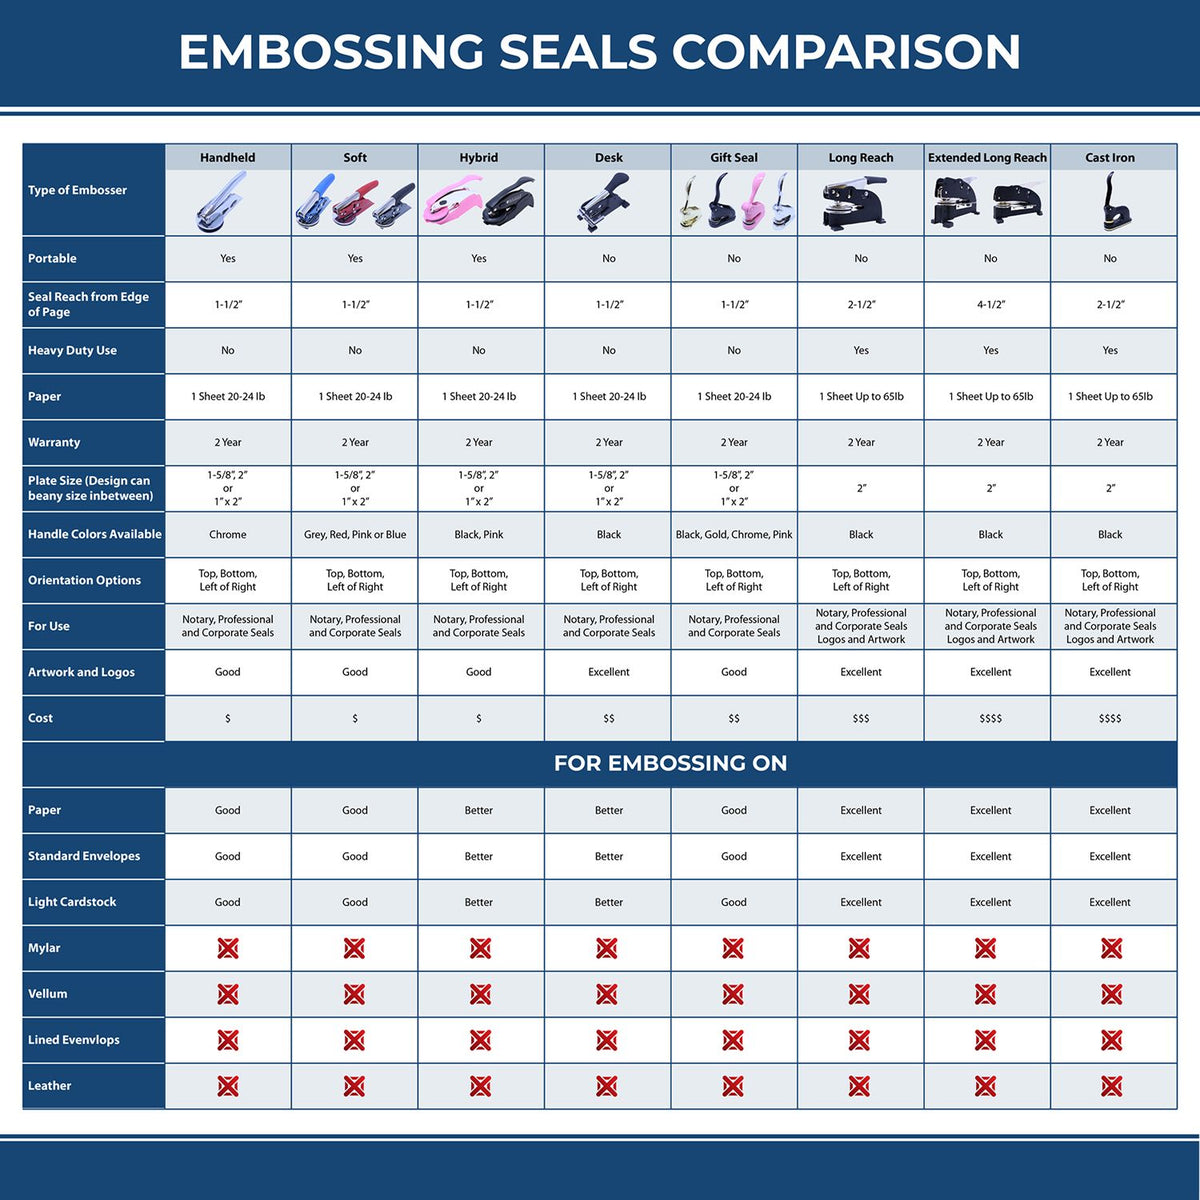 A comparison chart for the different types of mount models available for the New Mexico Engineer Desk Seal.